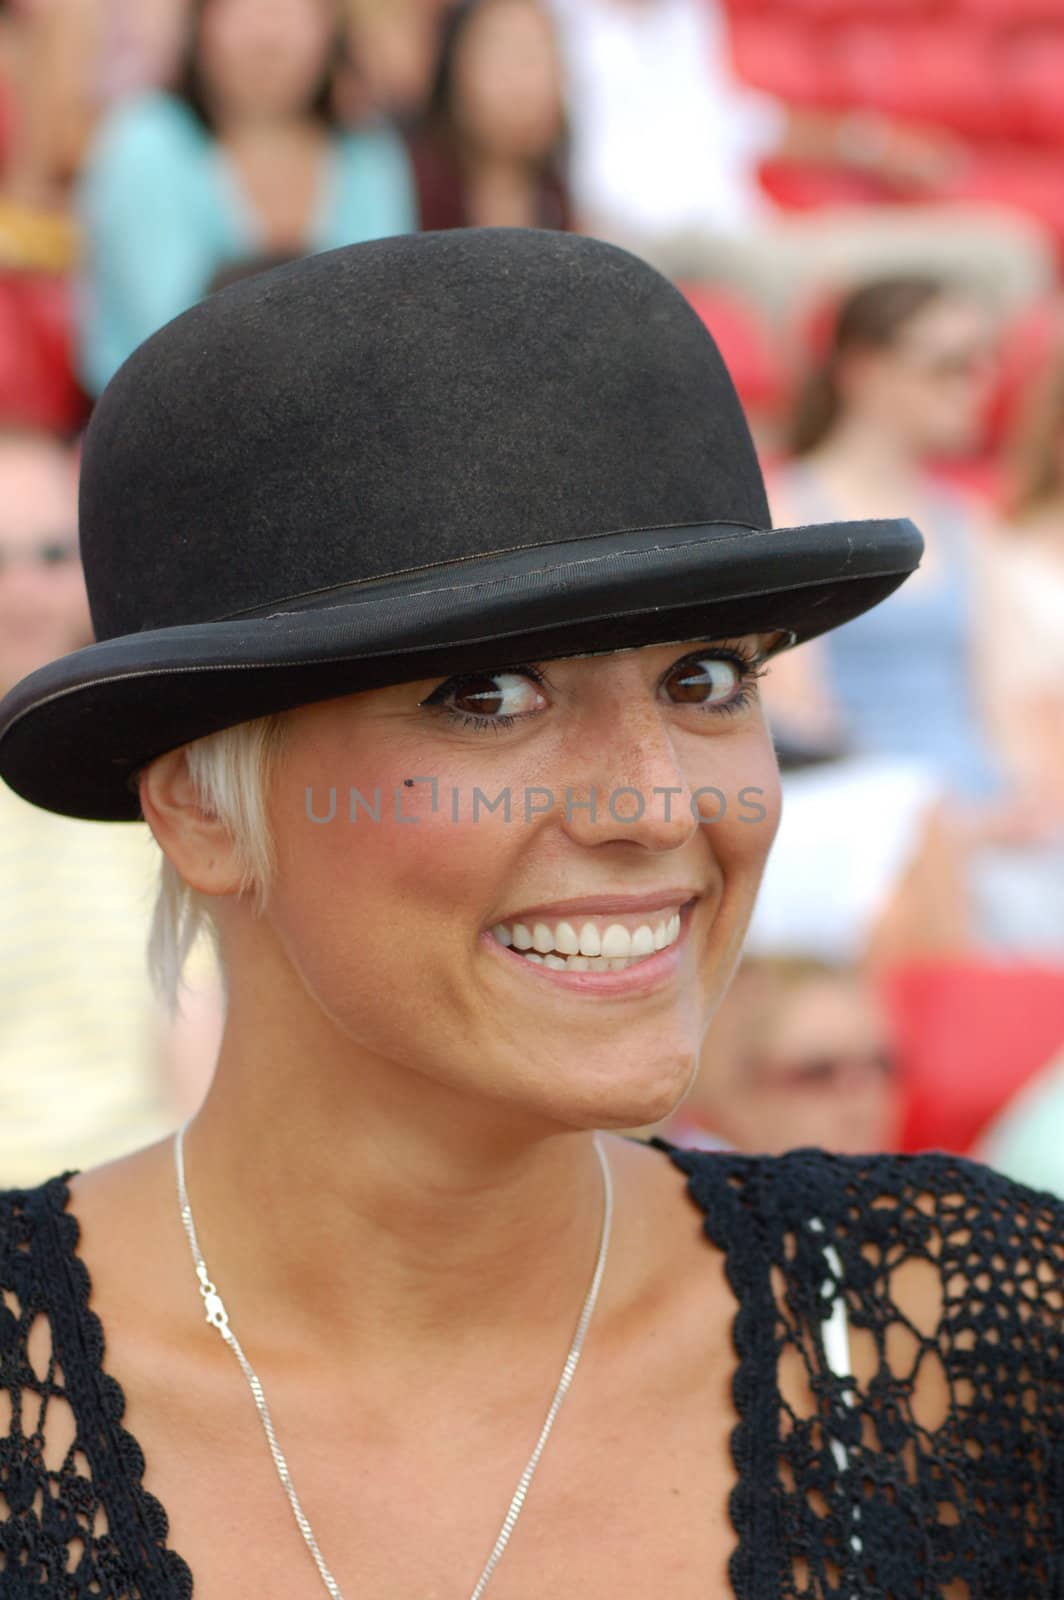 Breast Cancer survivor and campaigner Caroline Monk wearing a bowler hat at the Cartier Polo, Windsor.